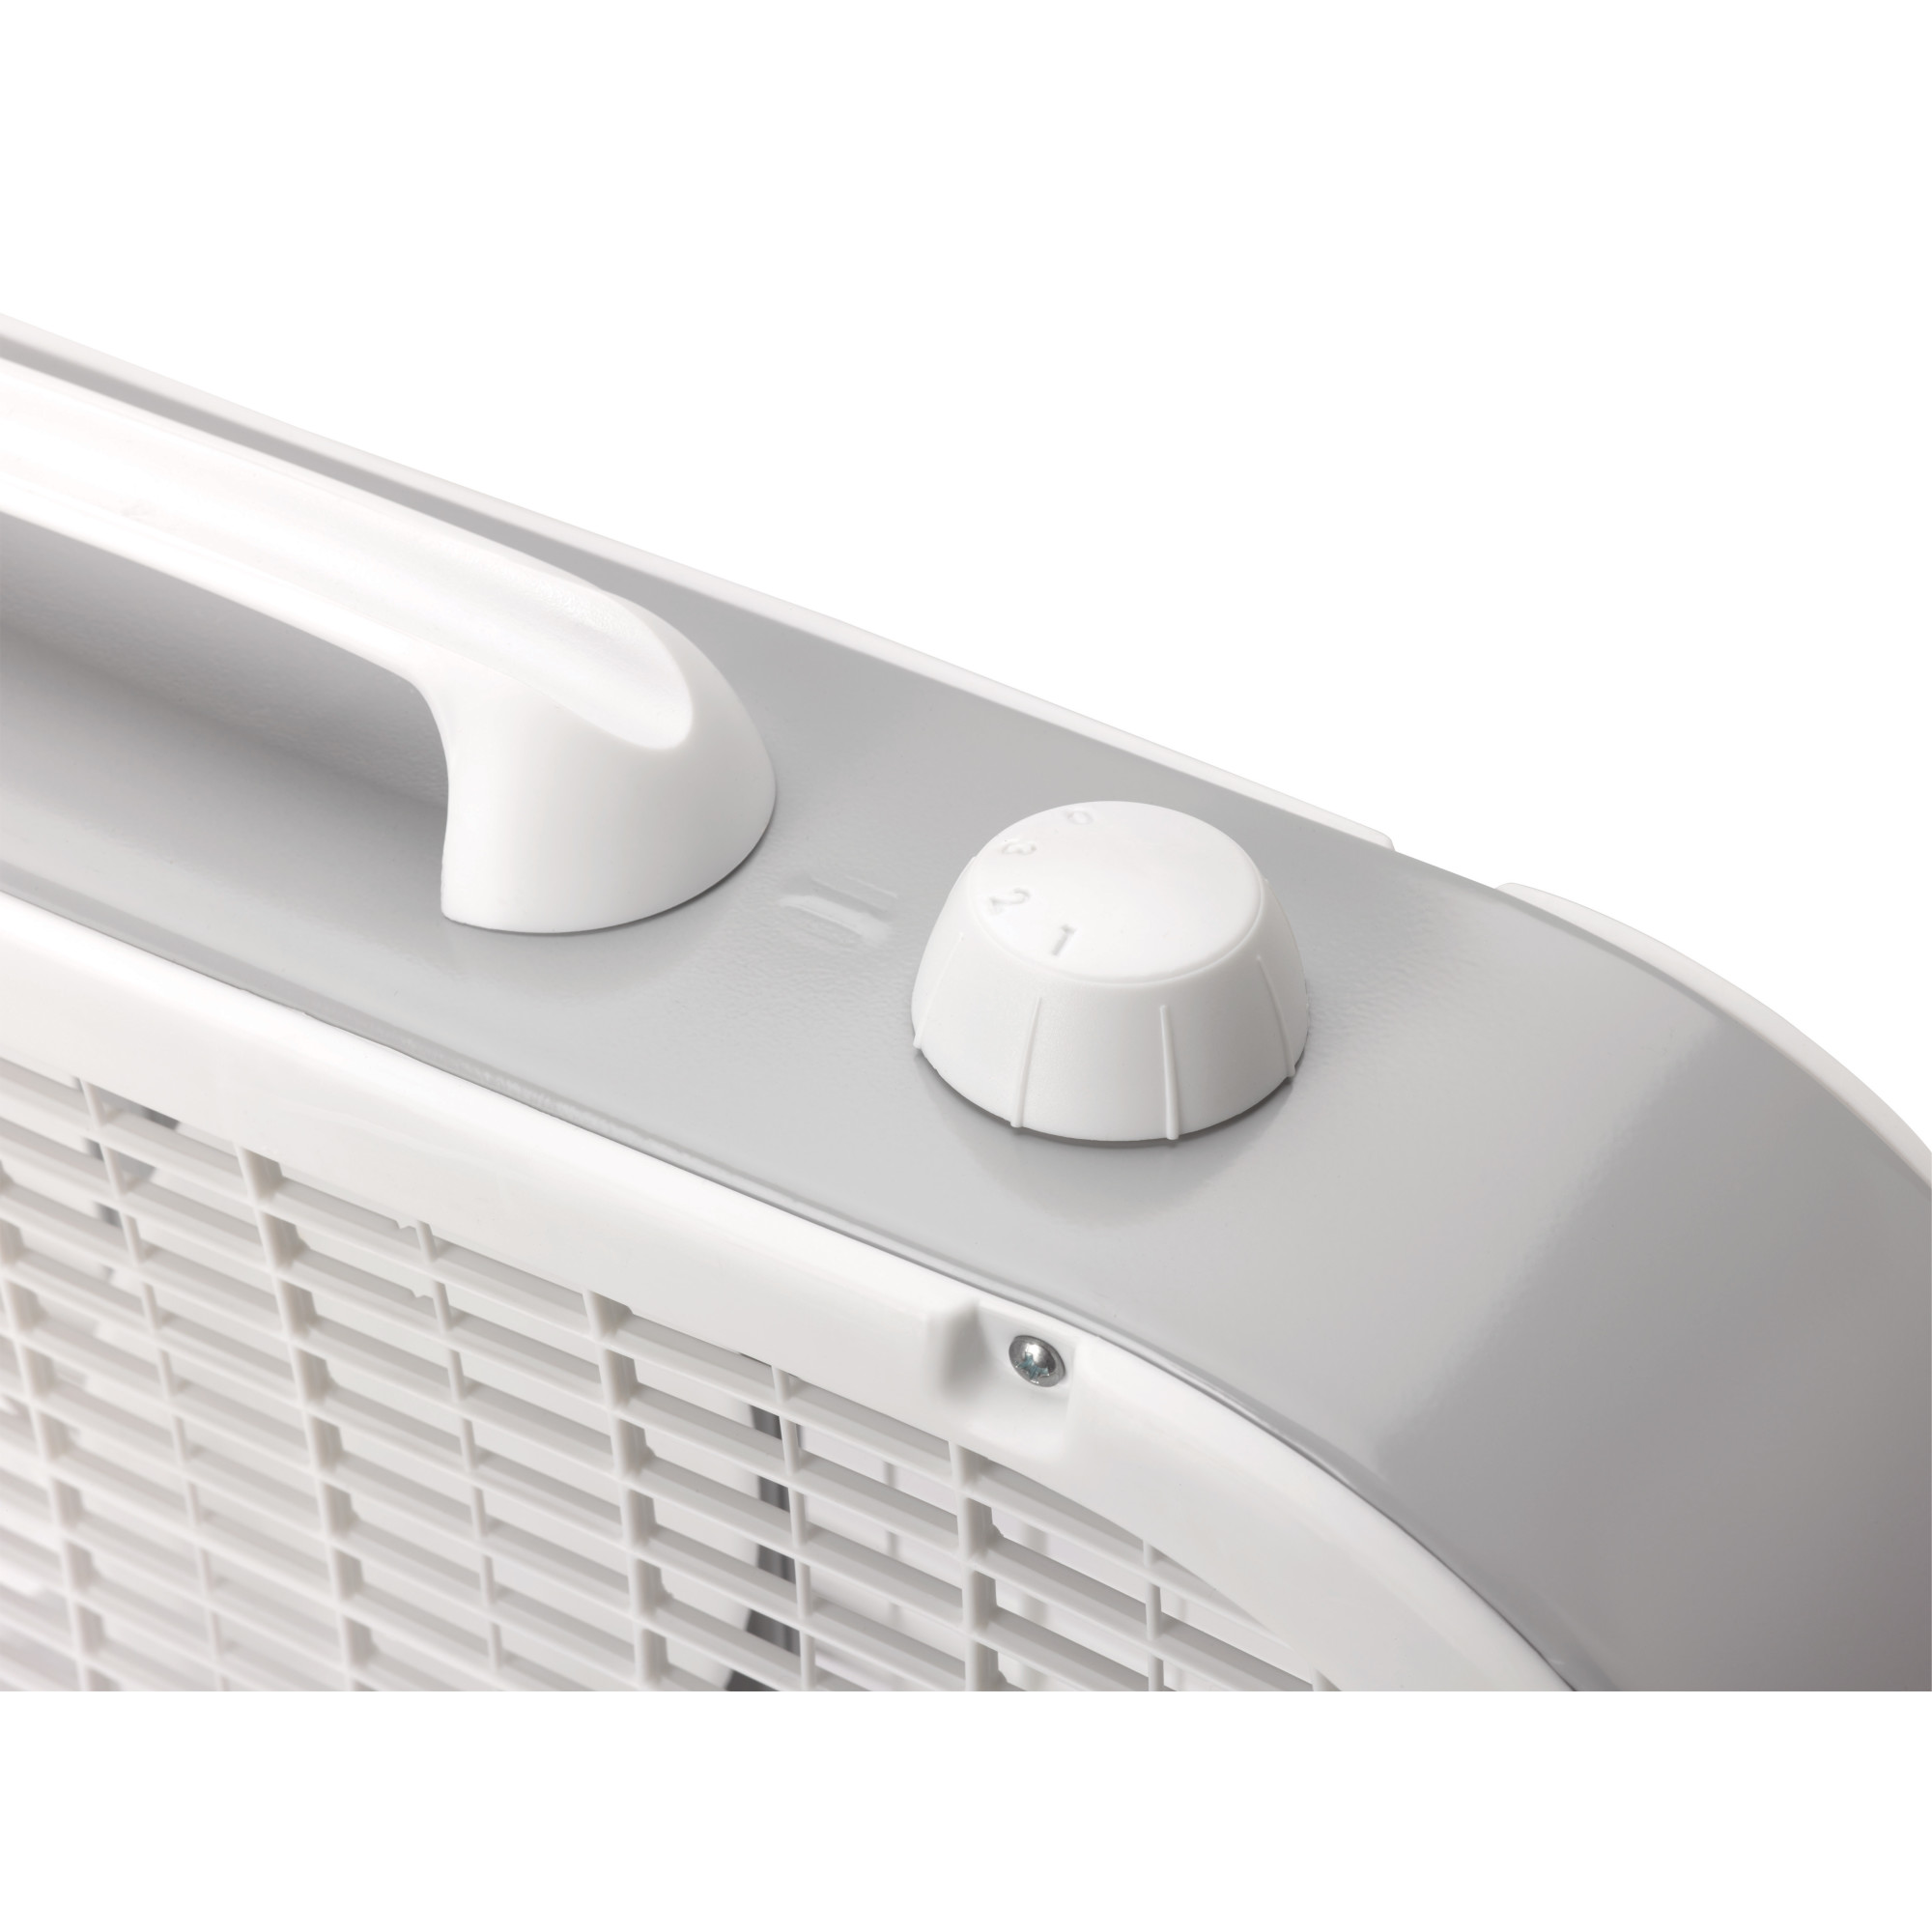 Lasko 20" Classic Box Fan with Weather-Resistant Motor, 3 Speeds, 22.5" H, White, B20200, New - image 3 of 6